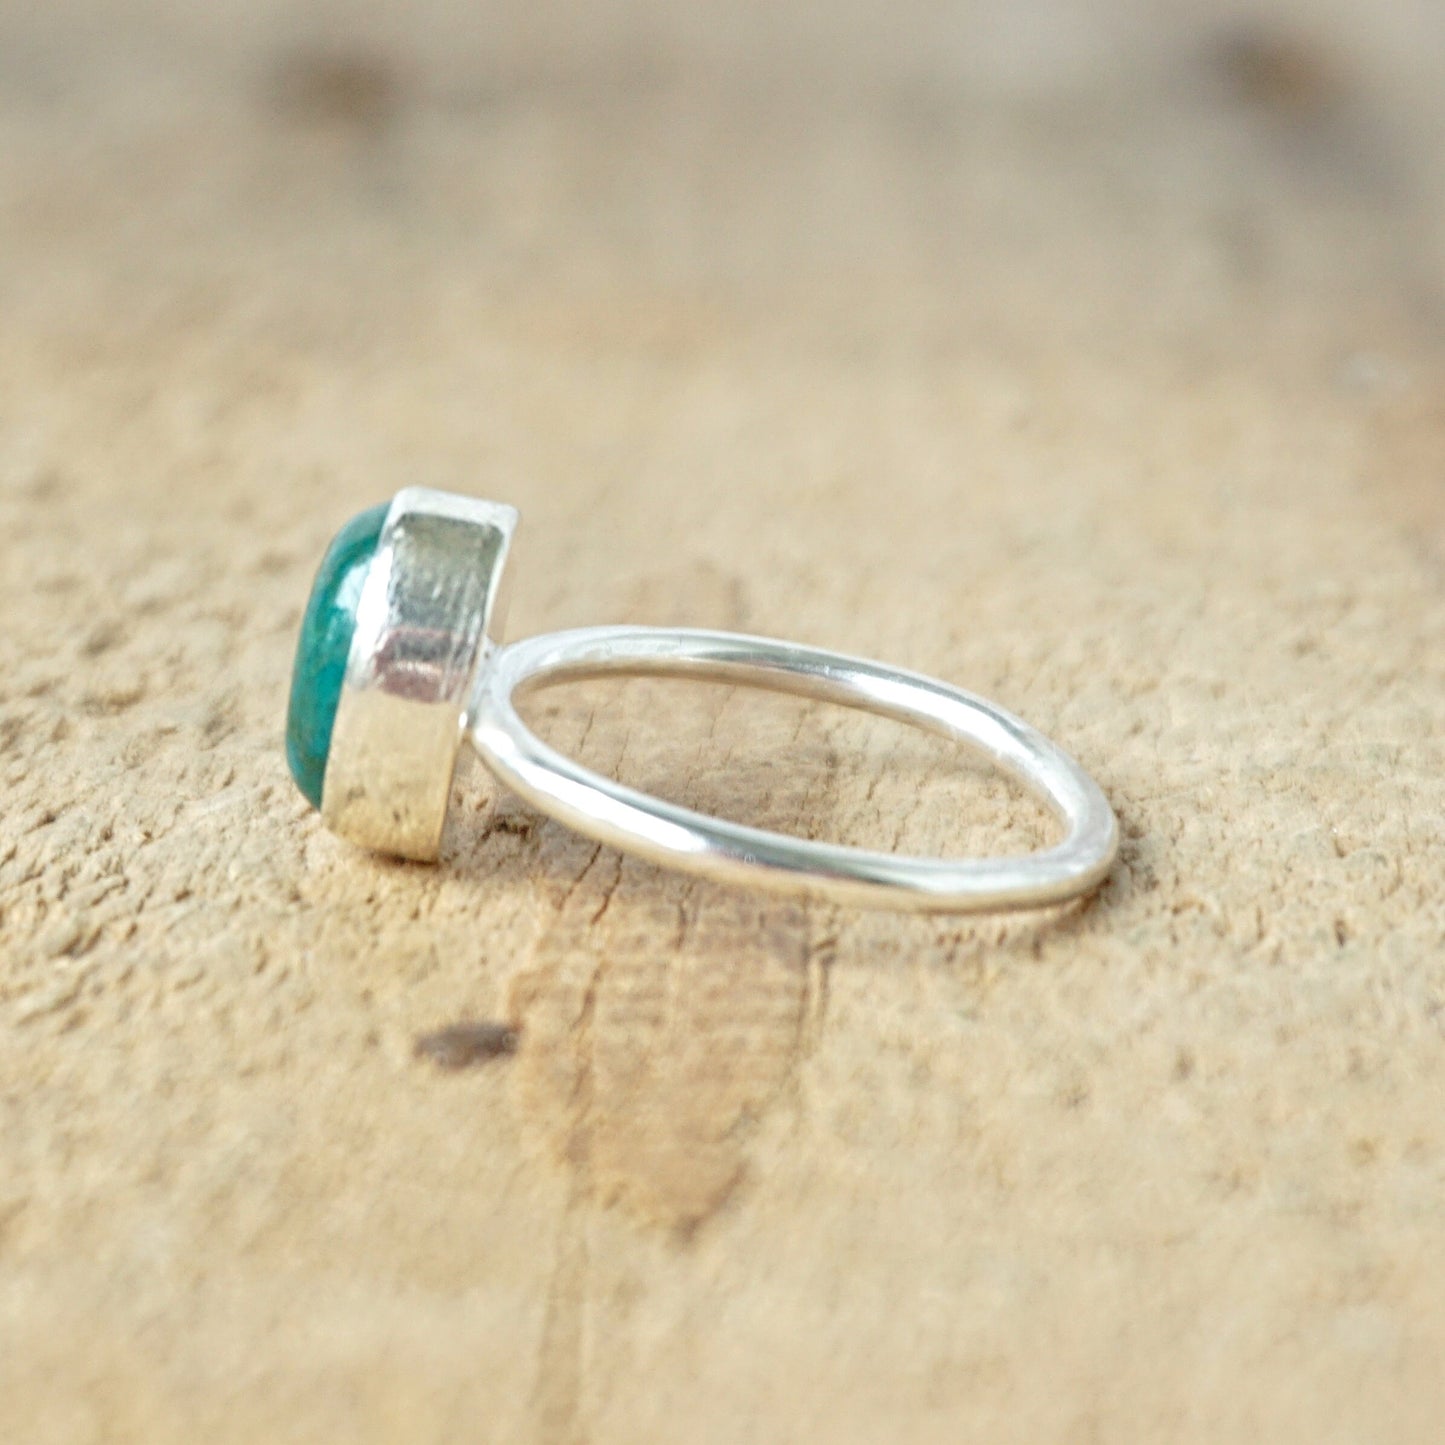 Size 6 Chrysocolla Stacking Ring - Chrysocolla Ring, Chrysocolla Jewelry, Stacking Jewelry, Stacker Ring, Sterling Silver Ring Jewelry